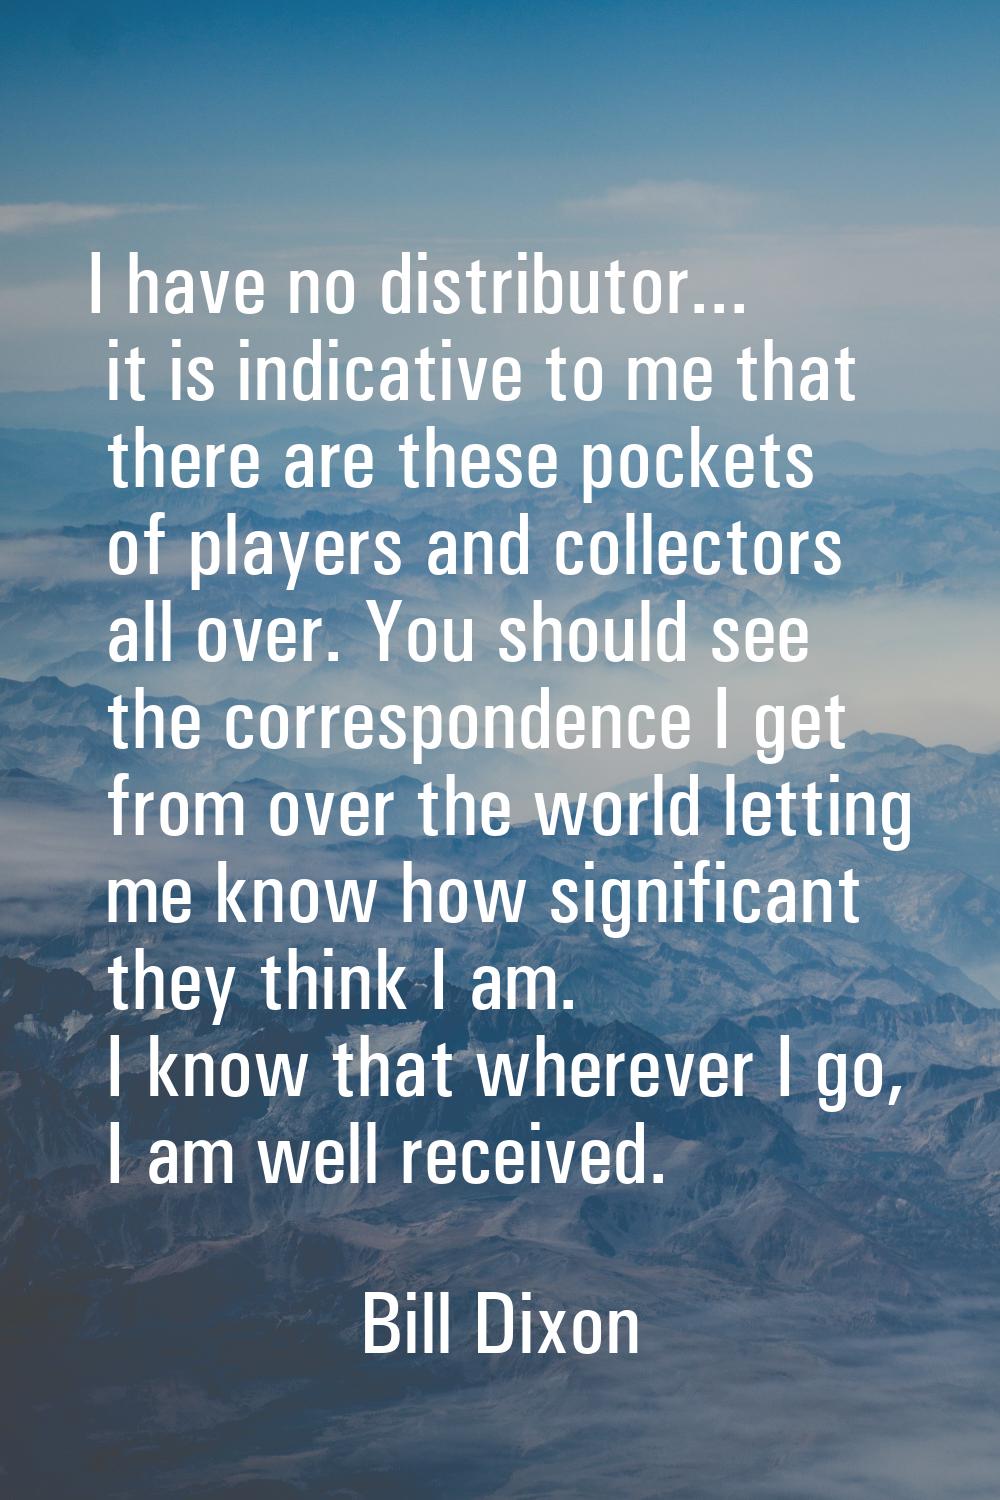 I have no distributor... it is indicative to me that there are these pockets of players and collect